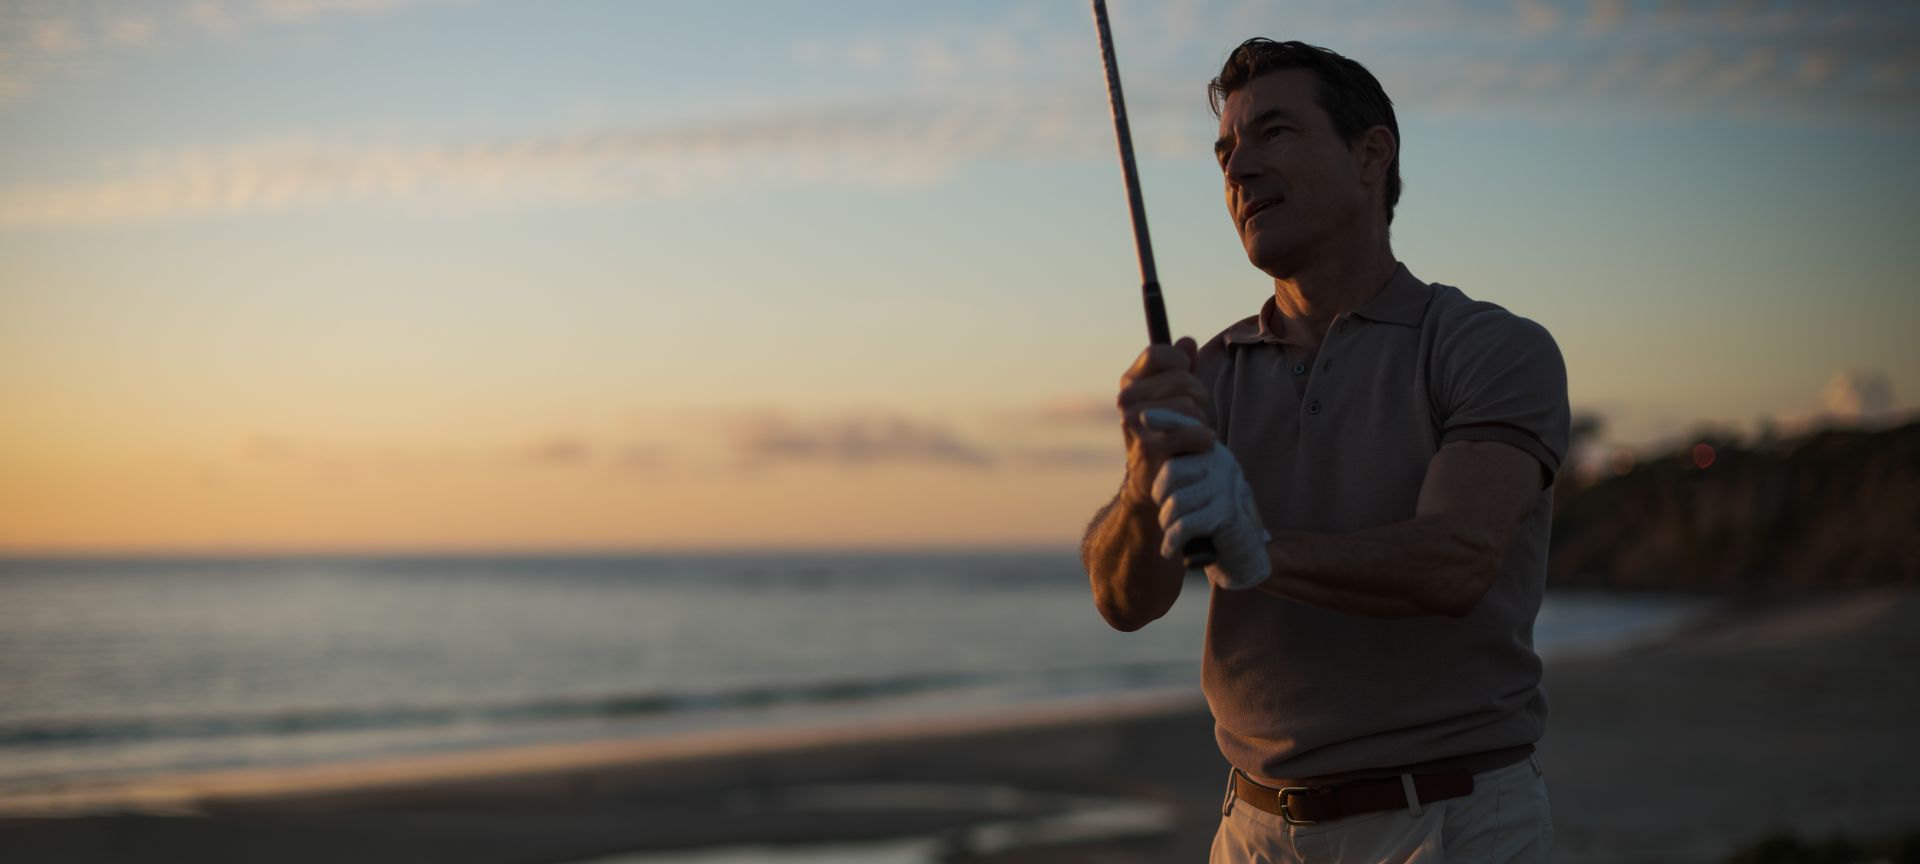 A Person Holding A Fishing Pole On A Beach